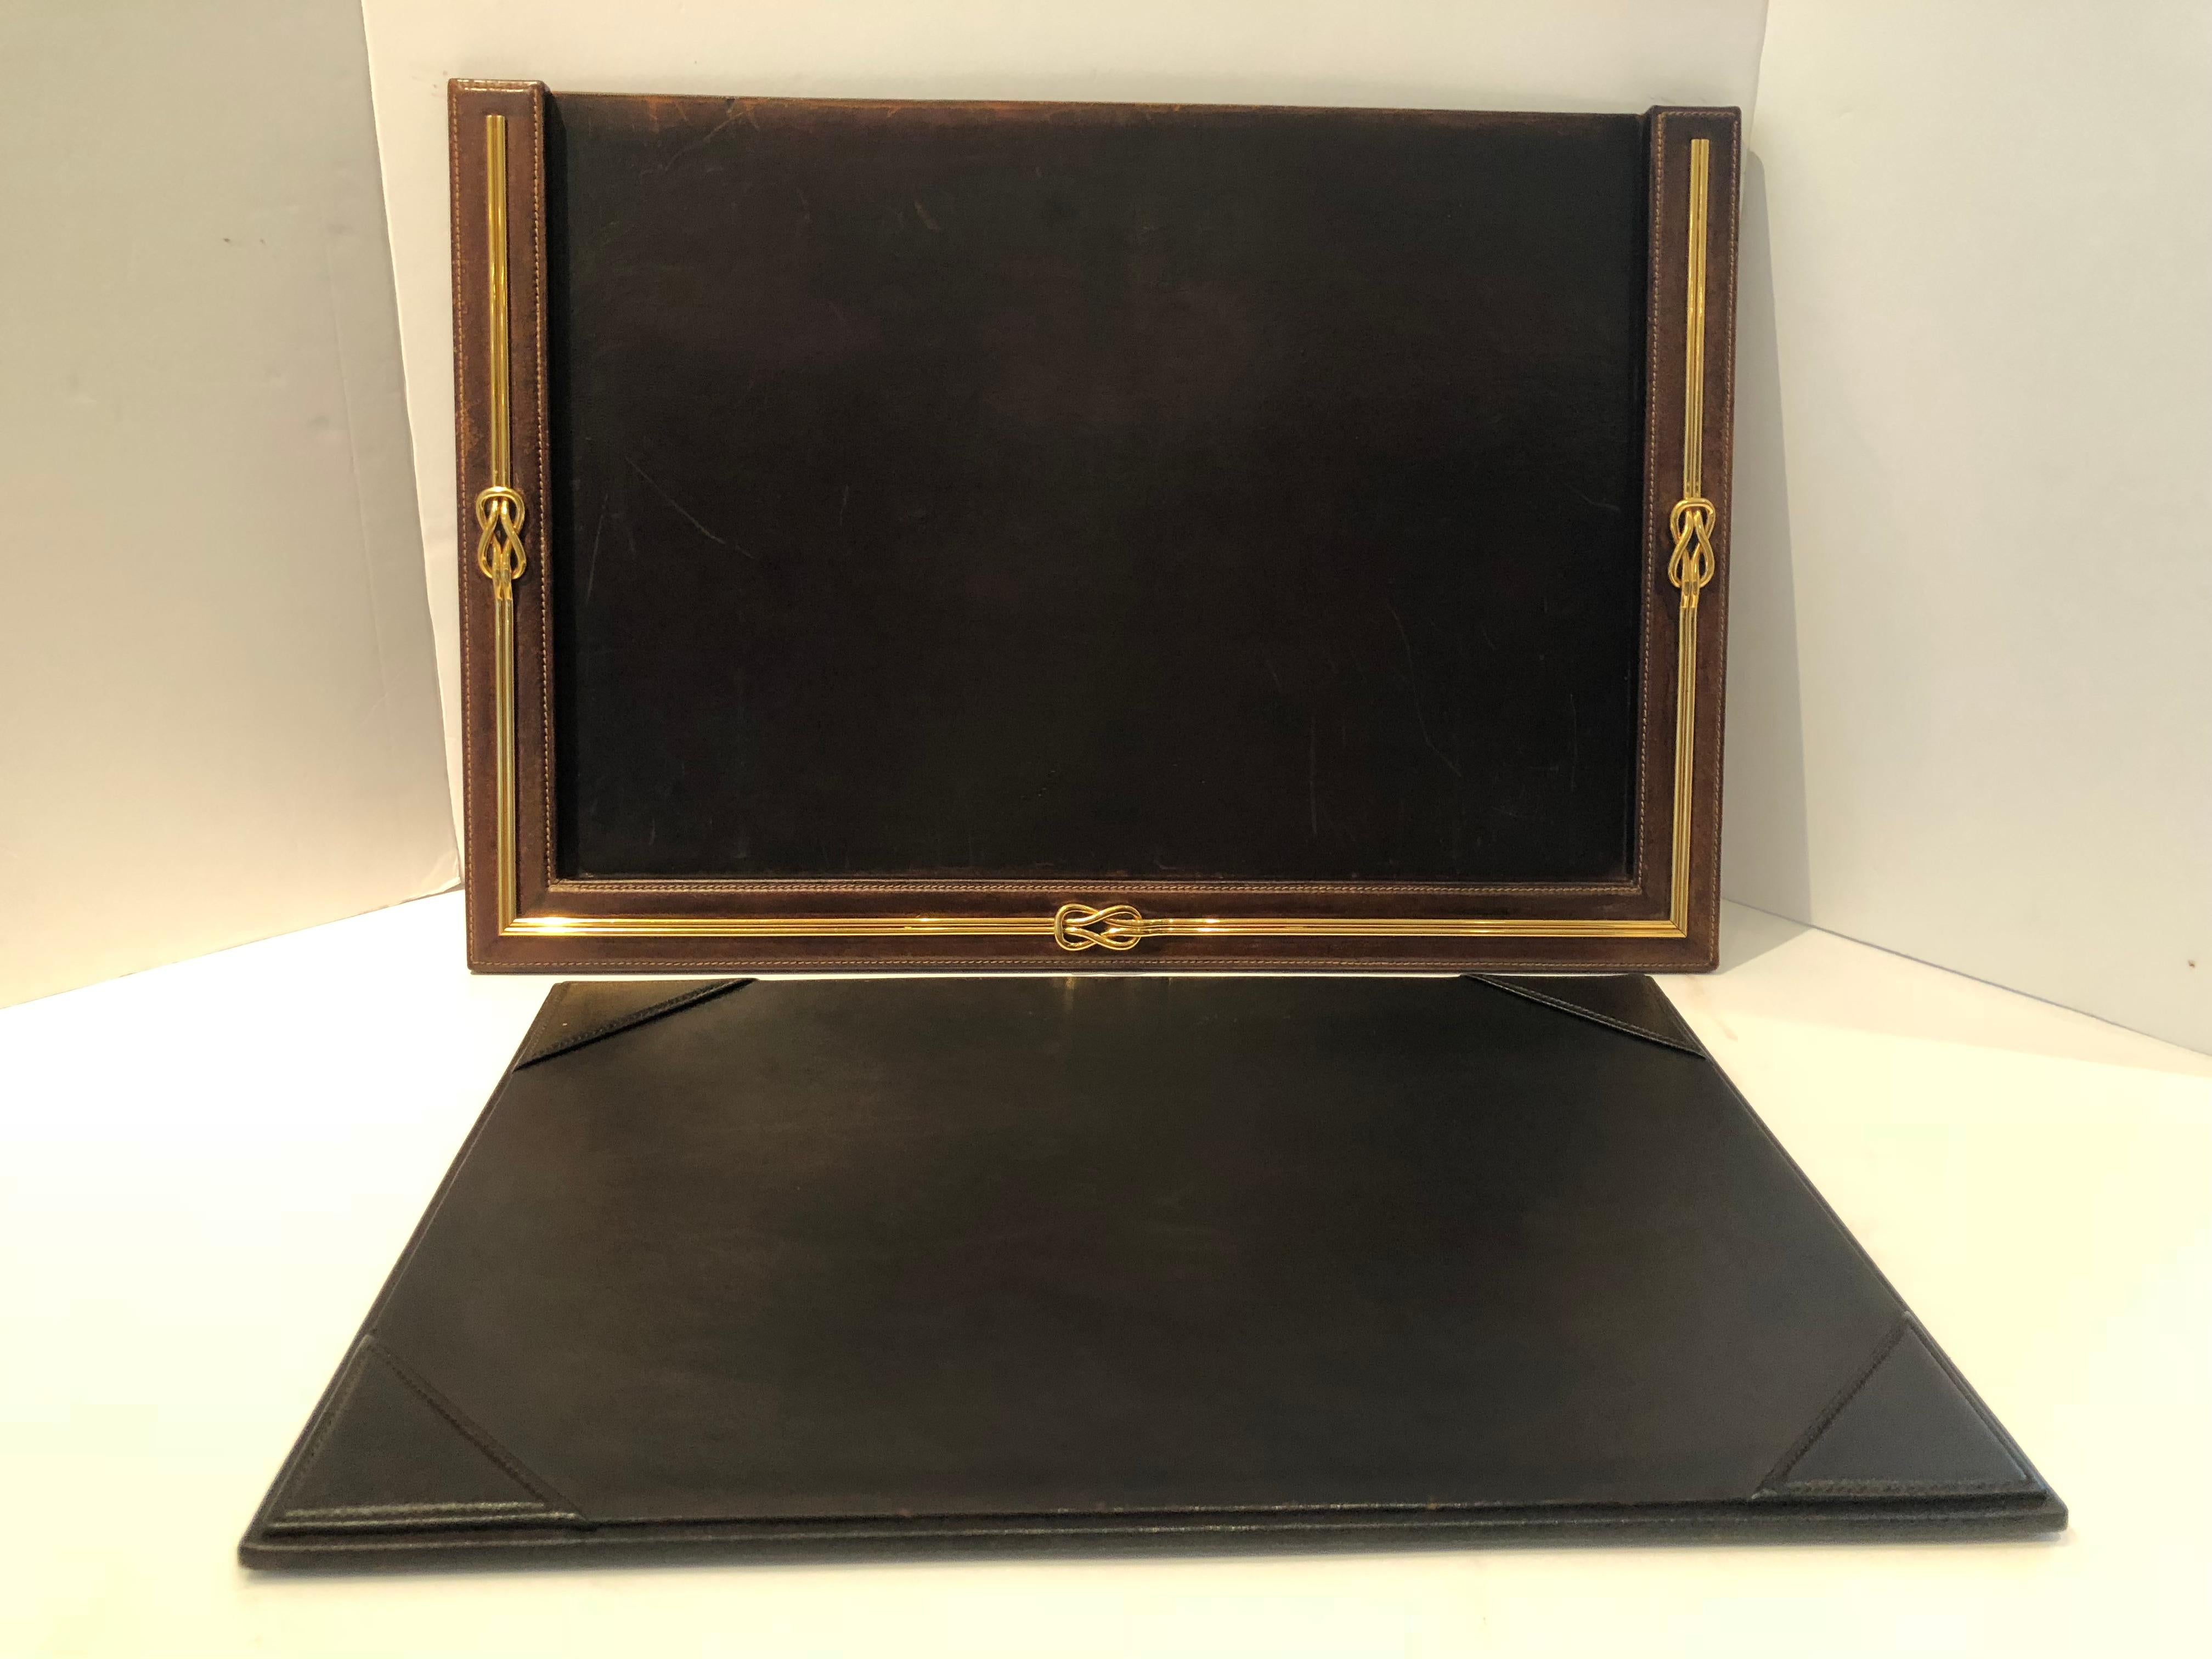 Chocolate brown leather meets thick heavy brass Gucci logo in this handsome vintage desk blotter and pen pencil holder. The blotter has a separate leather insert having four corners to hold paper in place. It is signed Made in Italy by Gucci. The